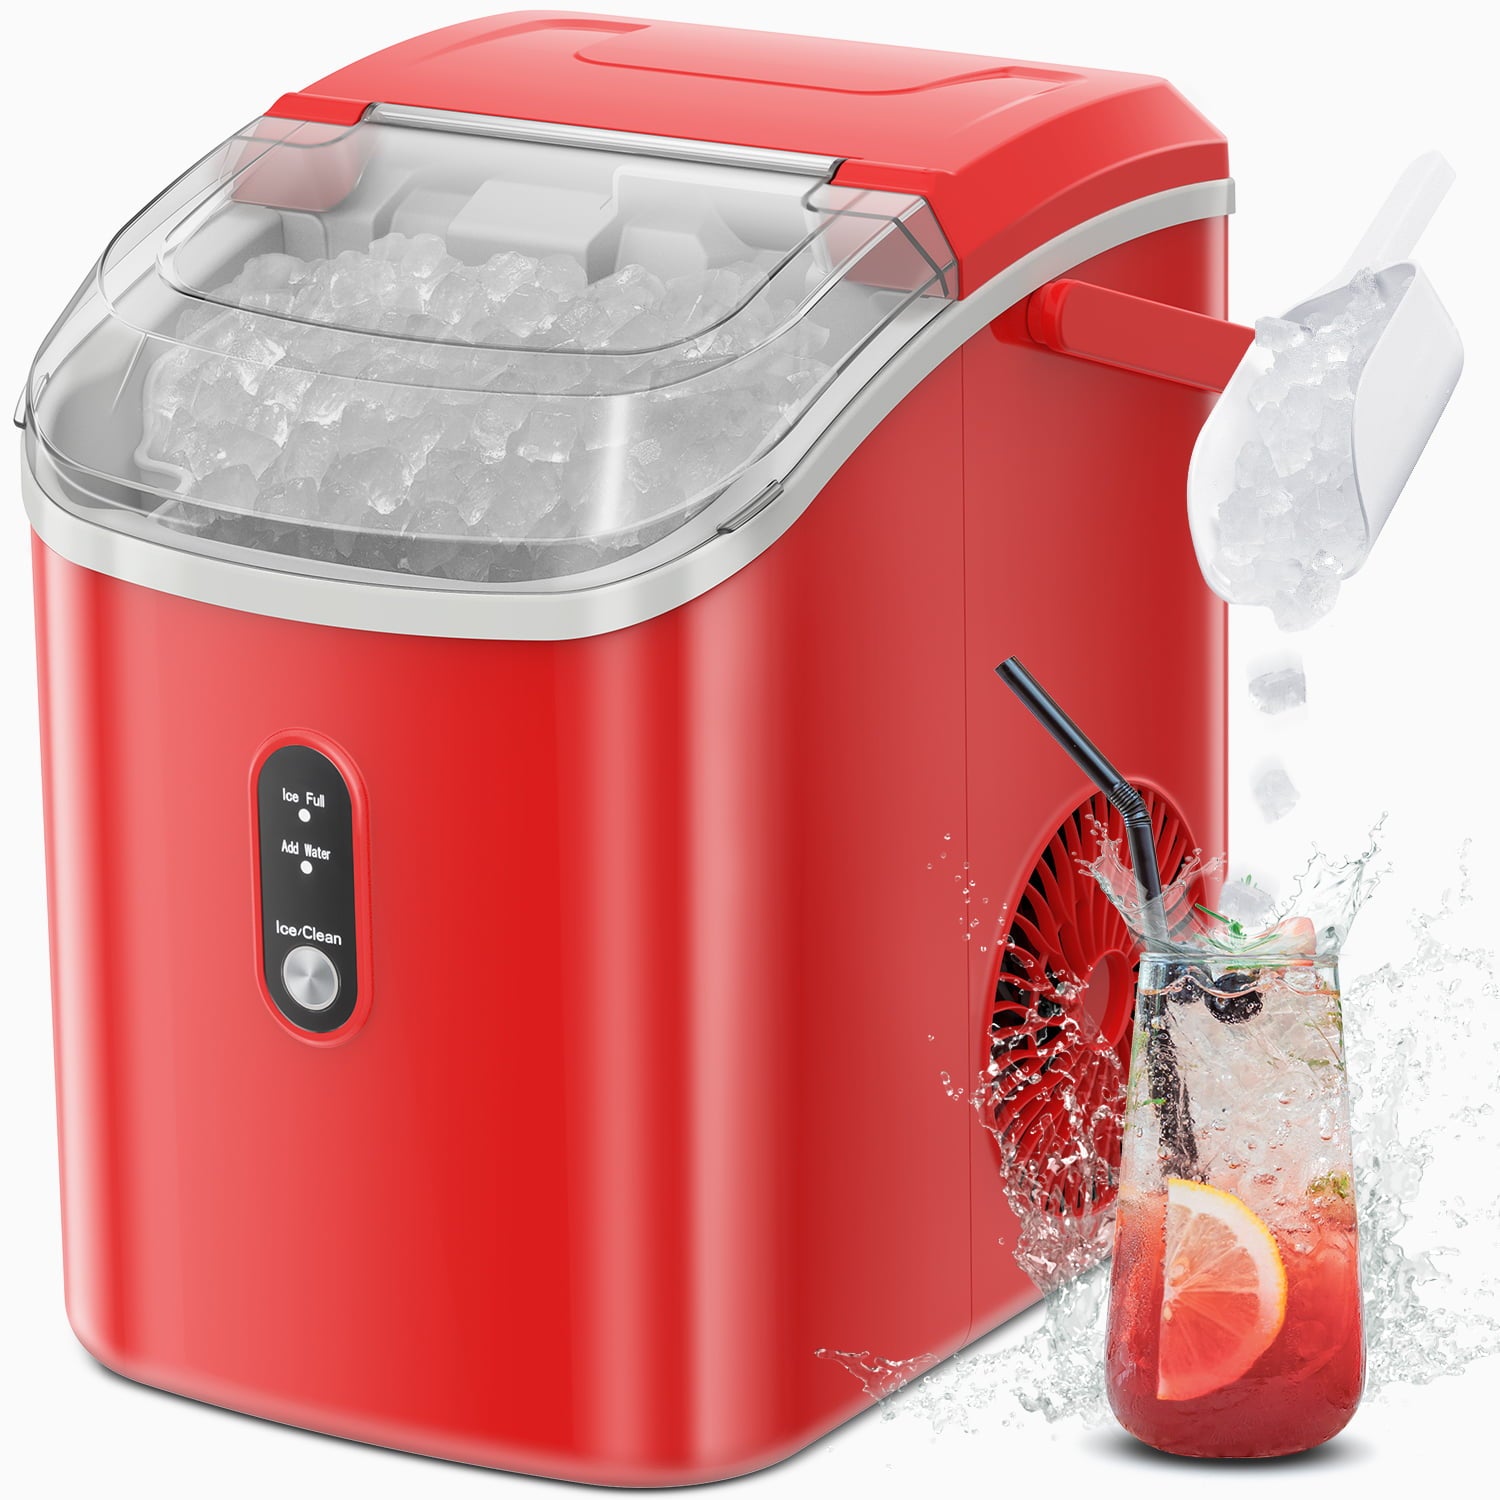 Nugget Ice Maker Machine - Nugget Ice Maker Countertop with Ice